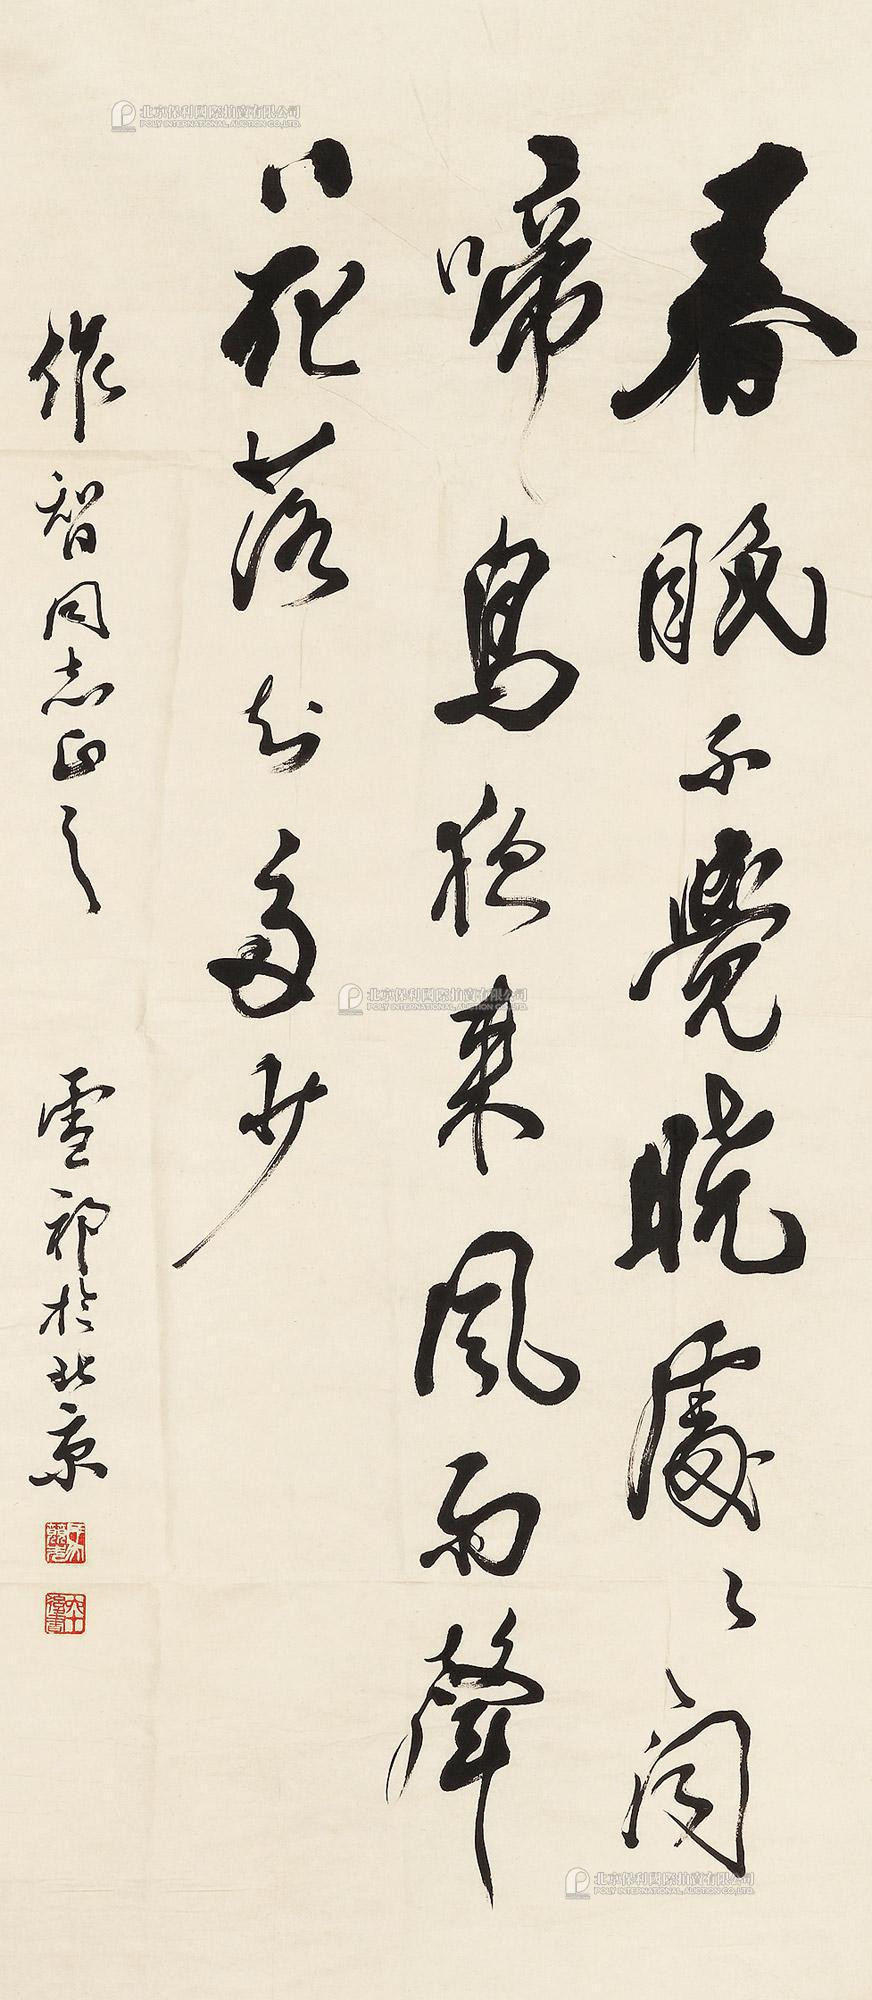 Calligraphy by Xue Qi